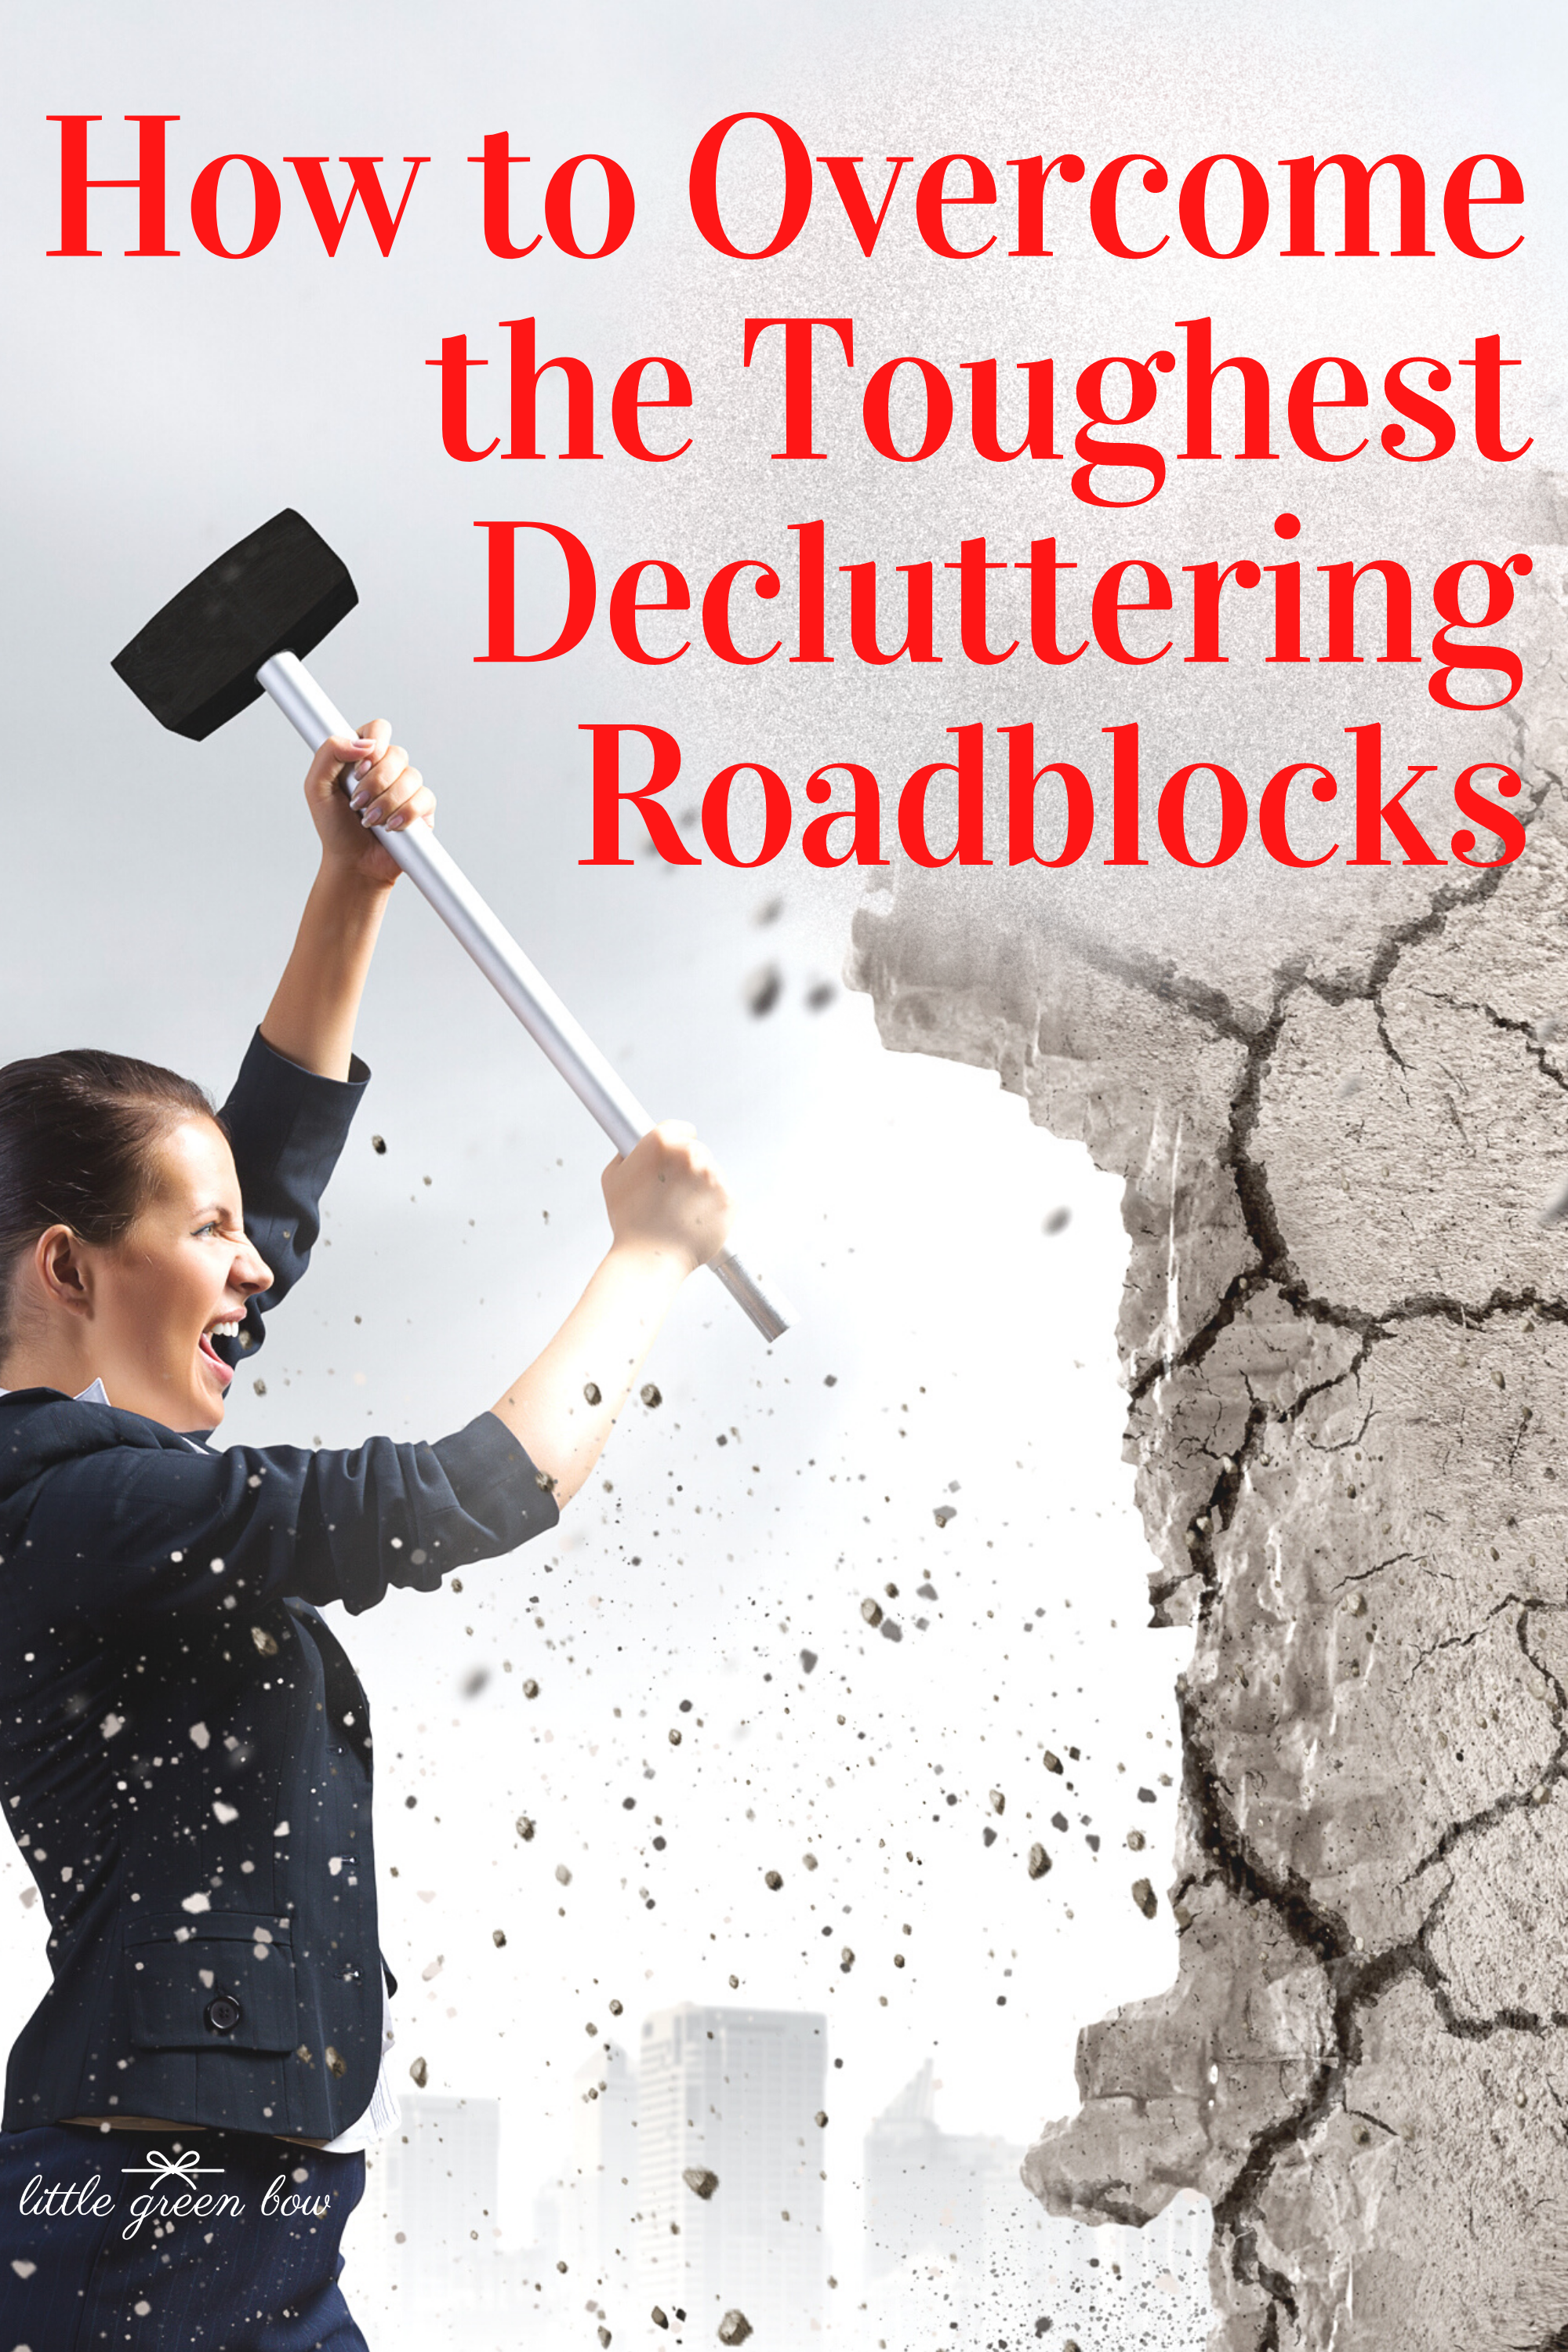 How to Overcome the Toughest Decluttering Roadblocks